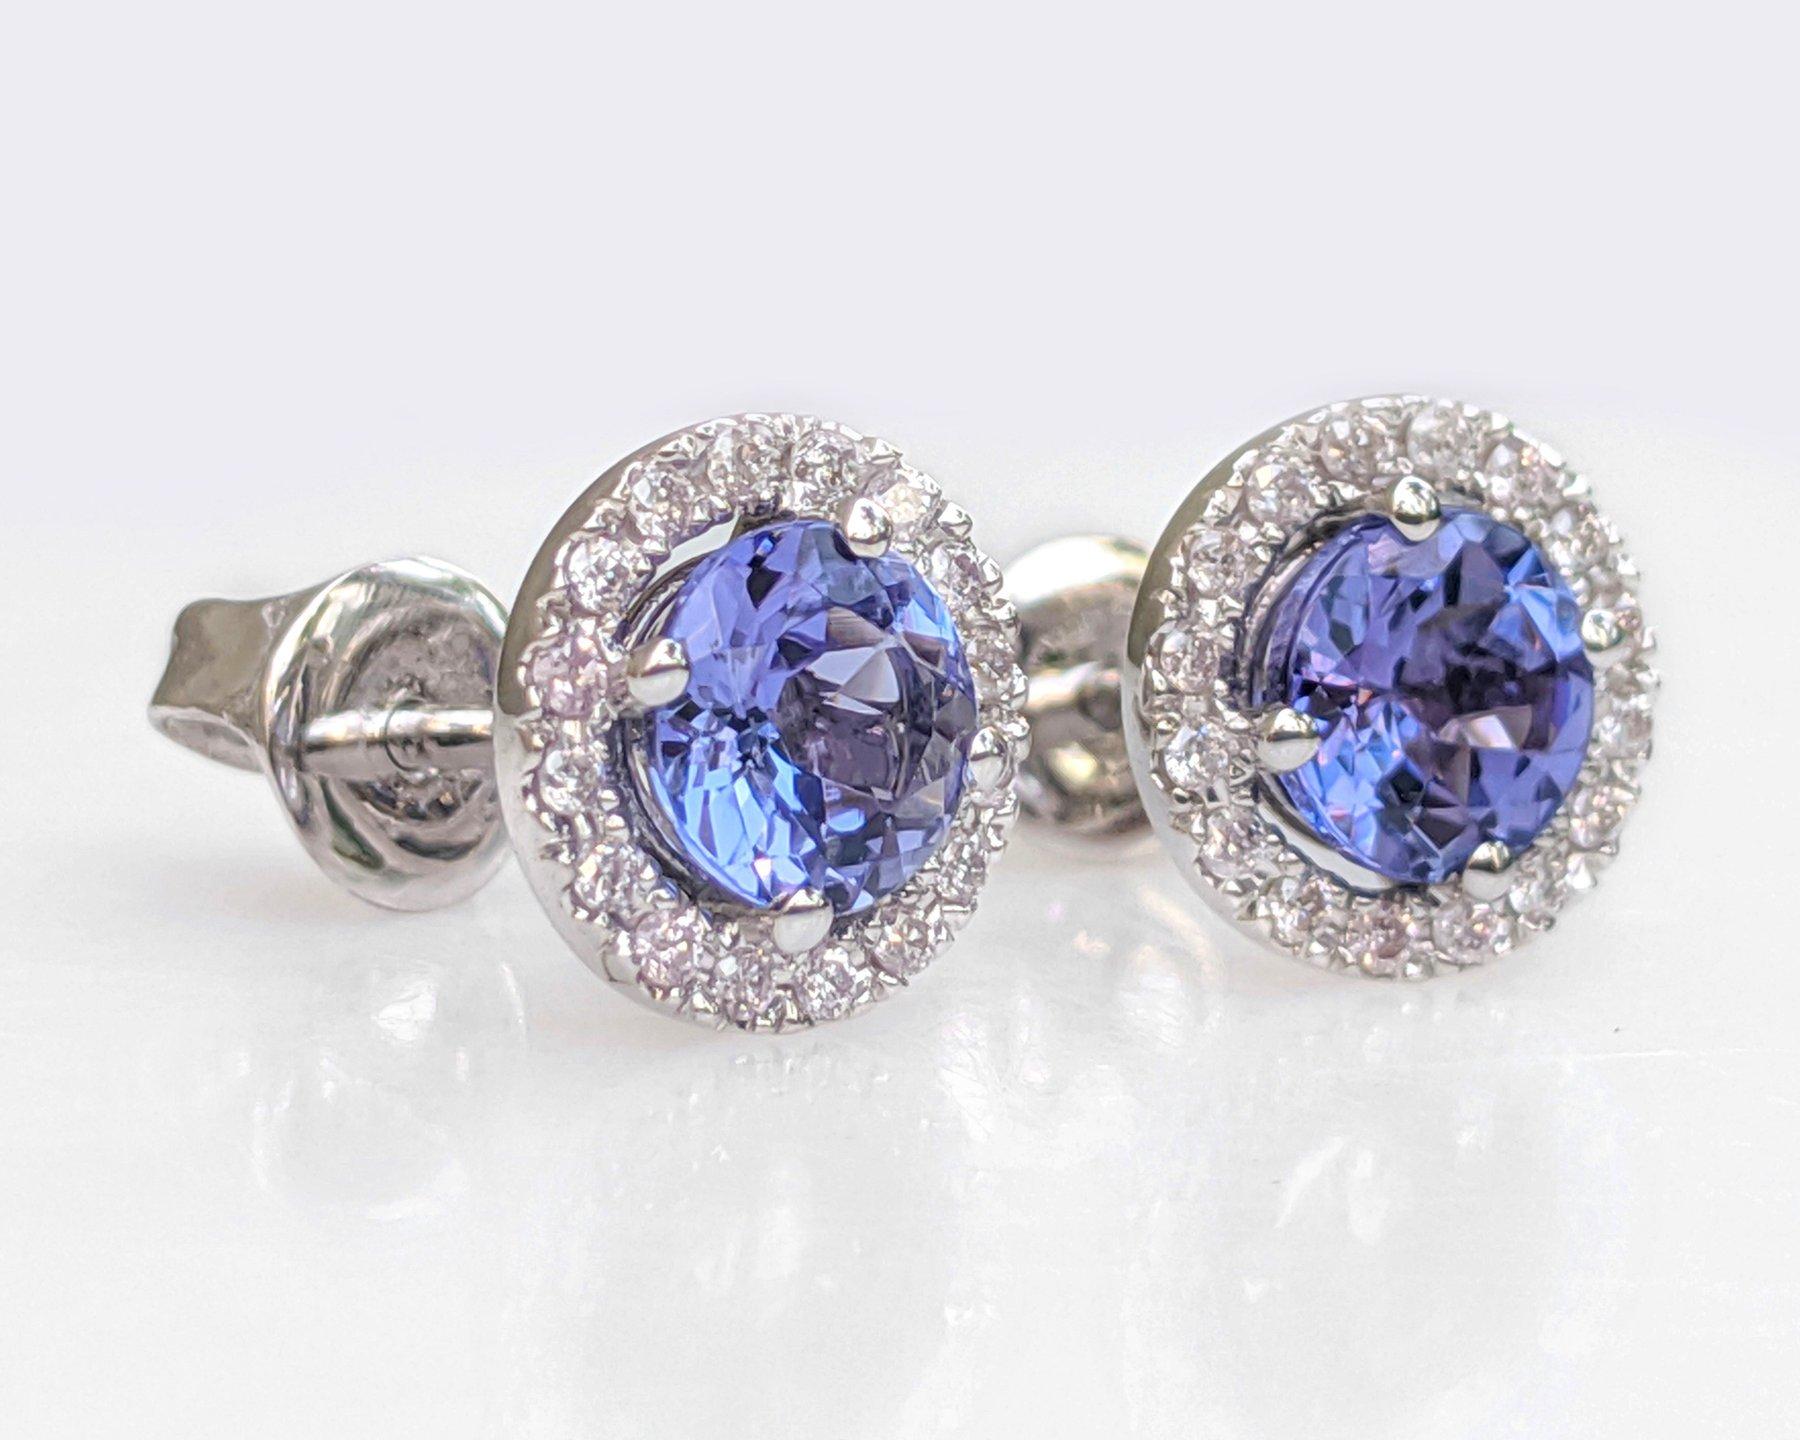 Round Cut NO RESERVE! 1.48Ct Tanzanite & 0.25Ct Pink Diamonds 14 kt. White gold Earrings For Sale